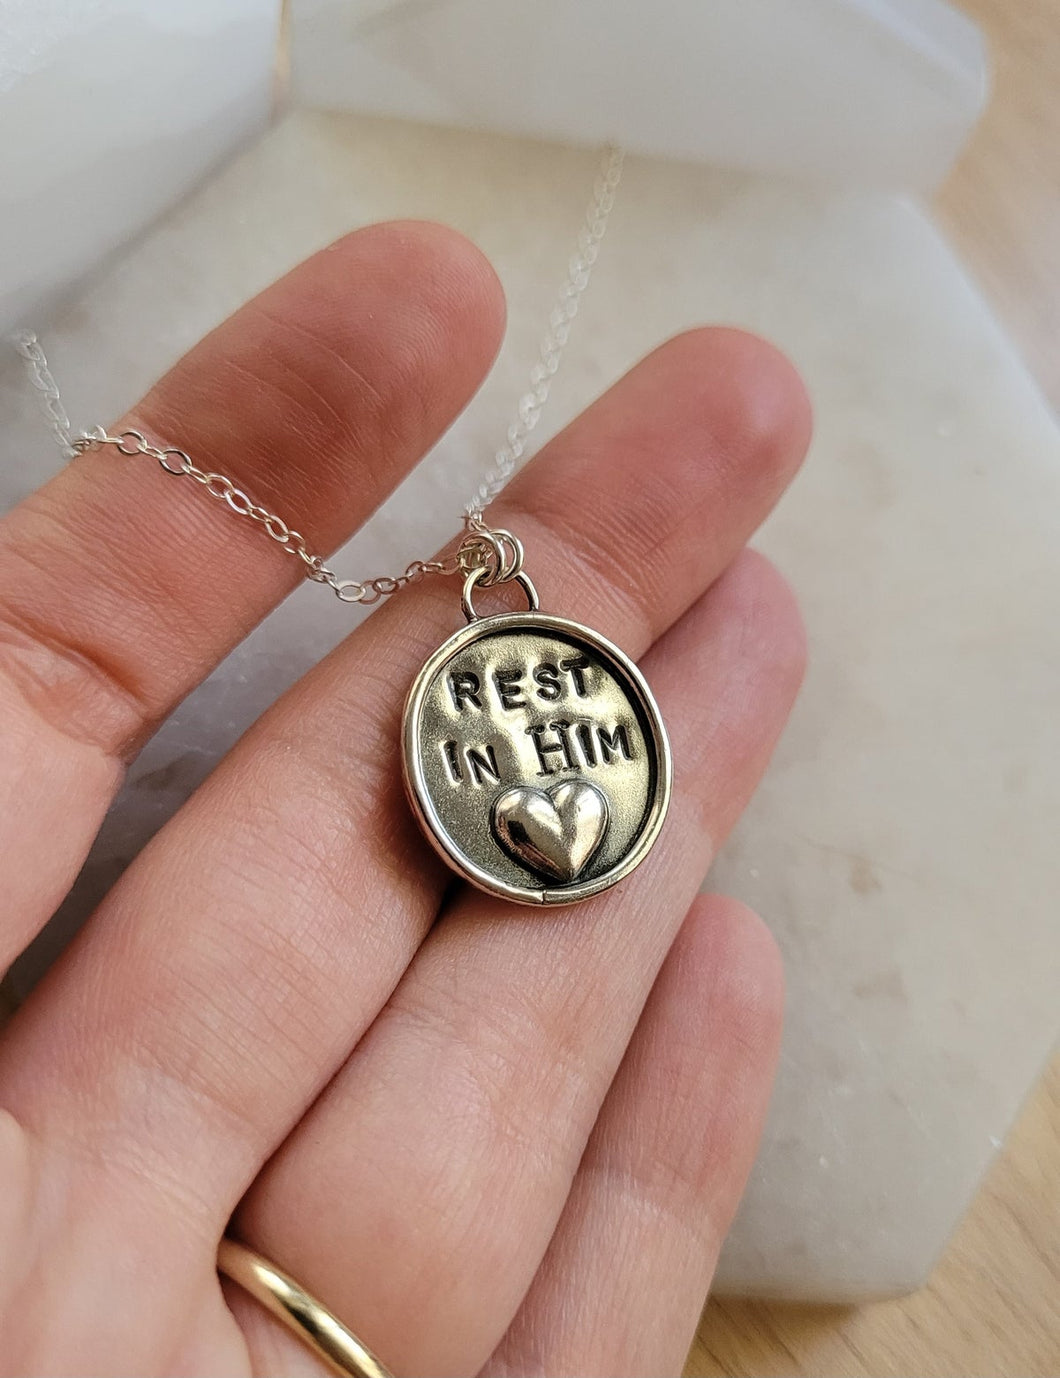 Rest In Him Necklace